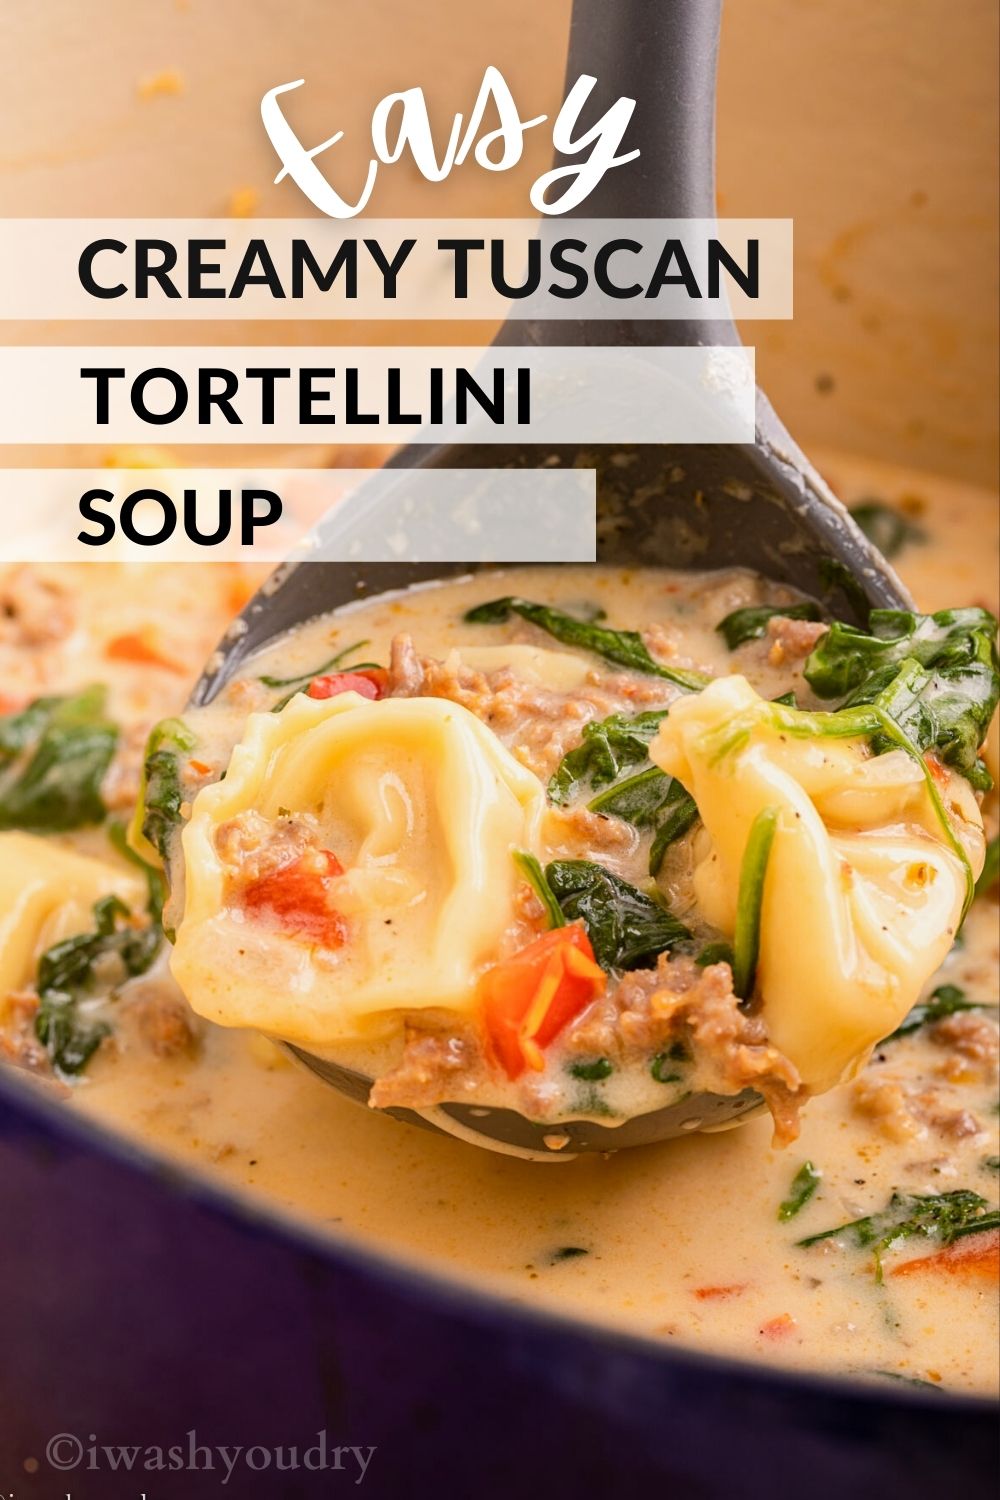 Spoonful of creamy tuscan tortellini soup above pot.